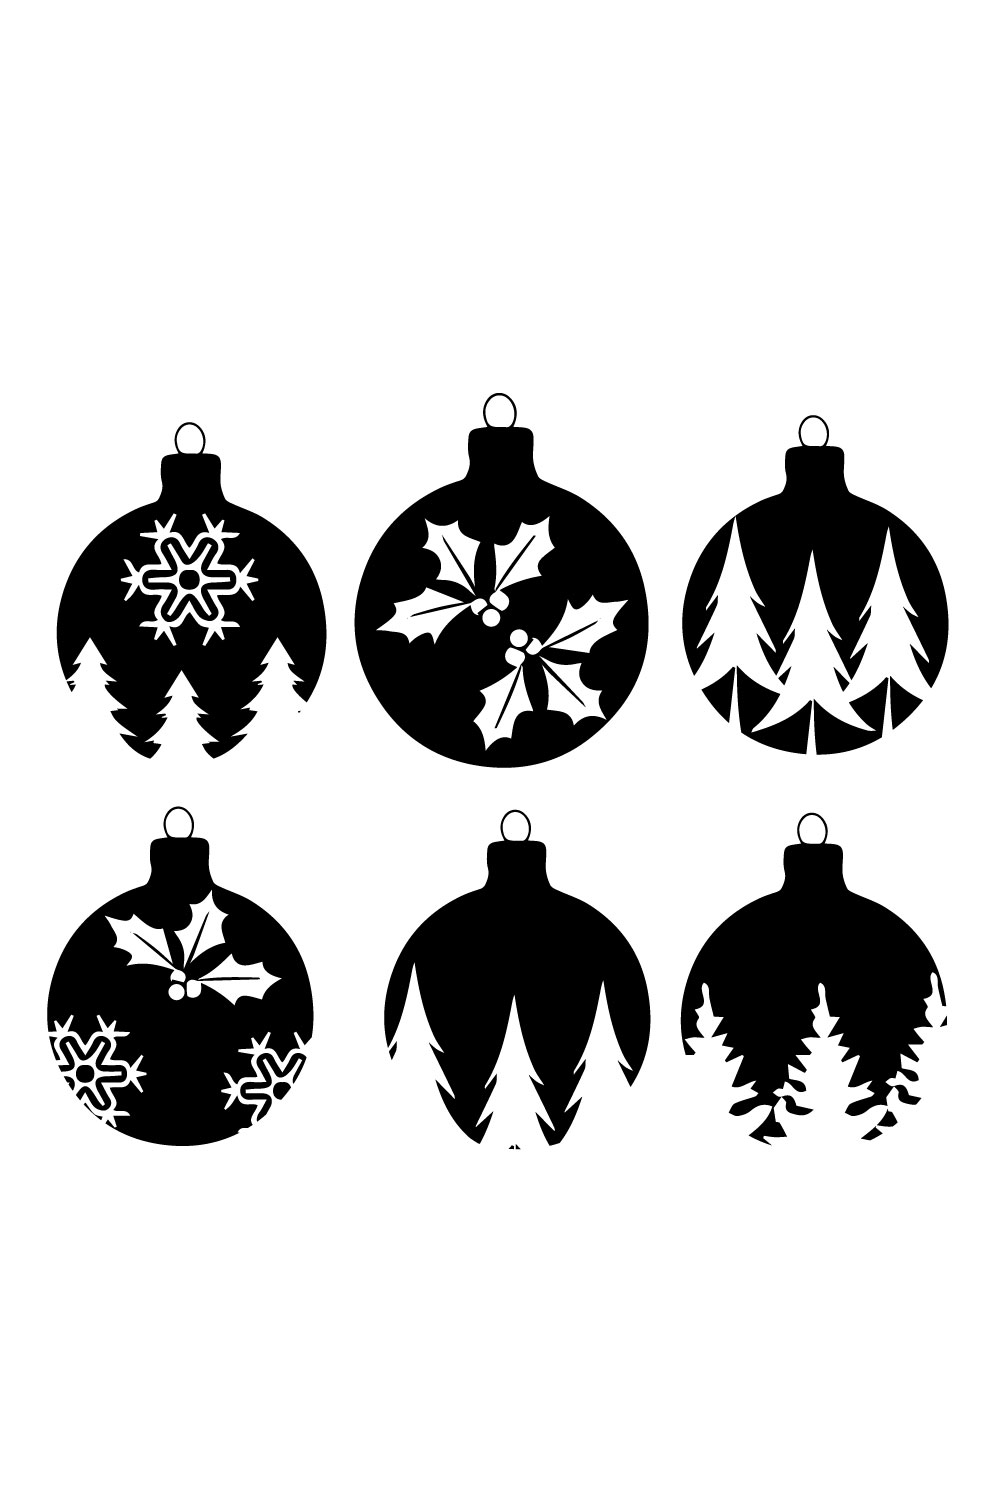 A selection of beautiful black images of Christmas decorations in the shape of a ball